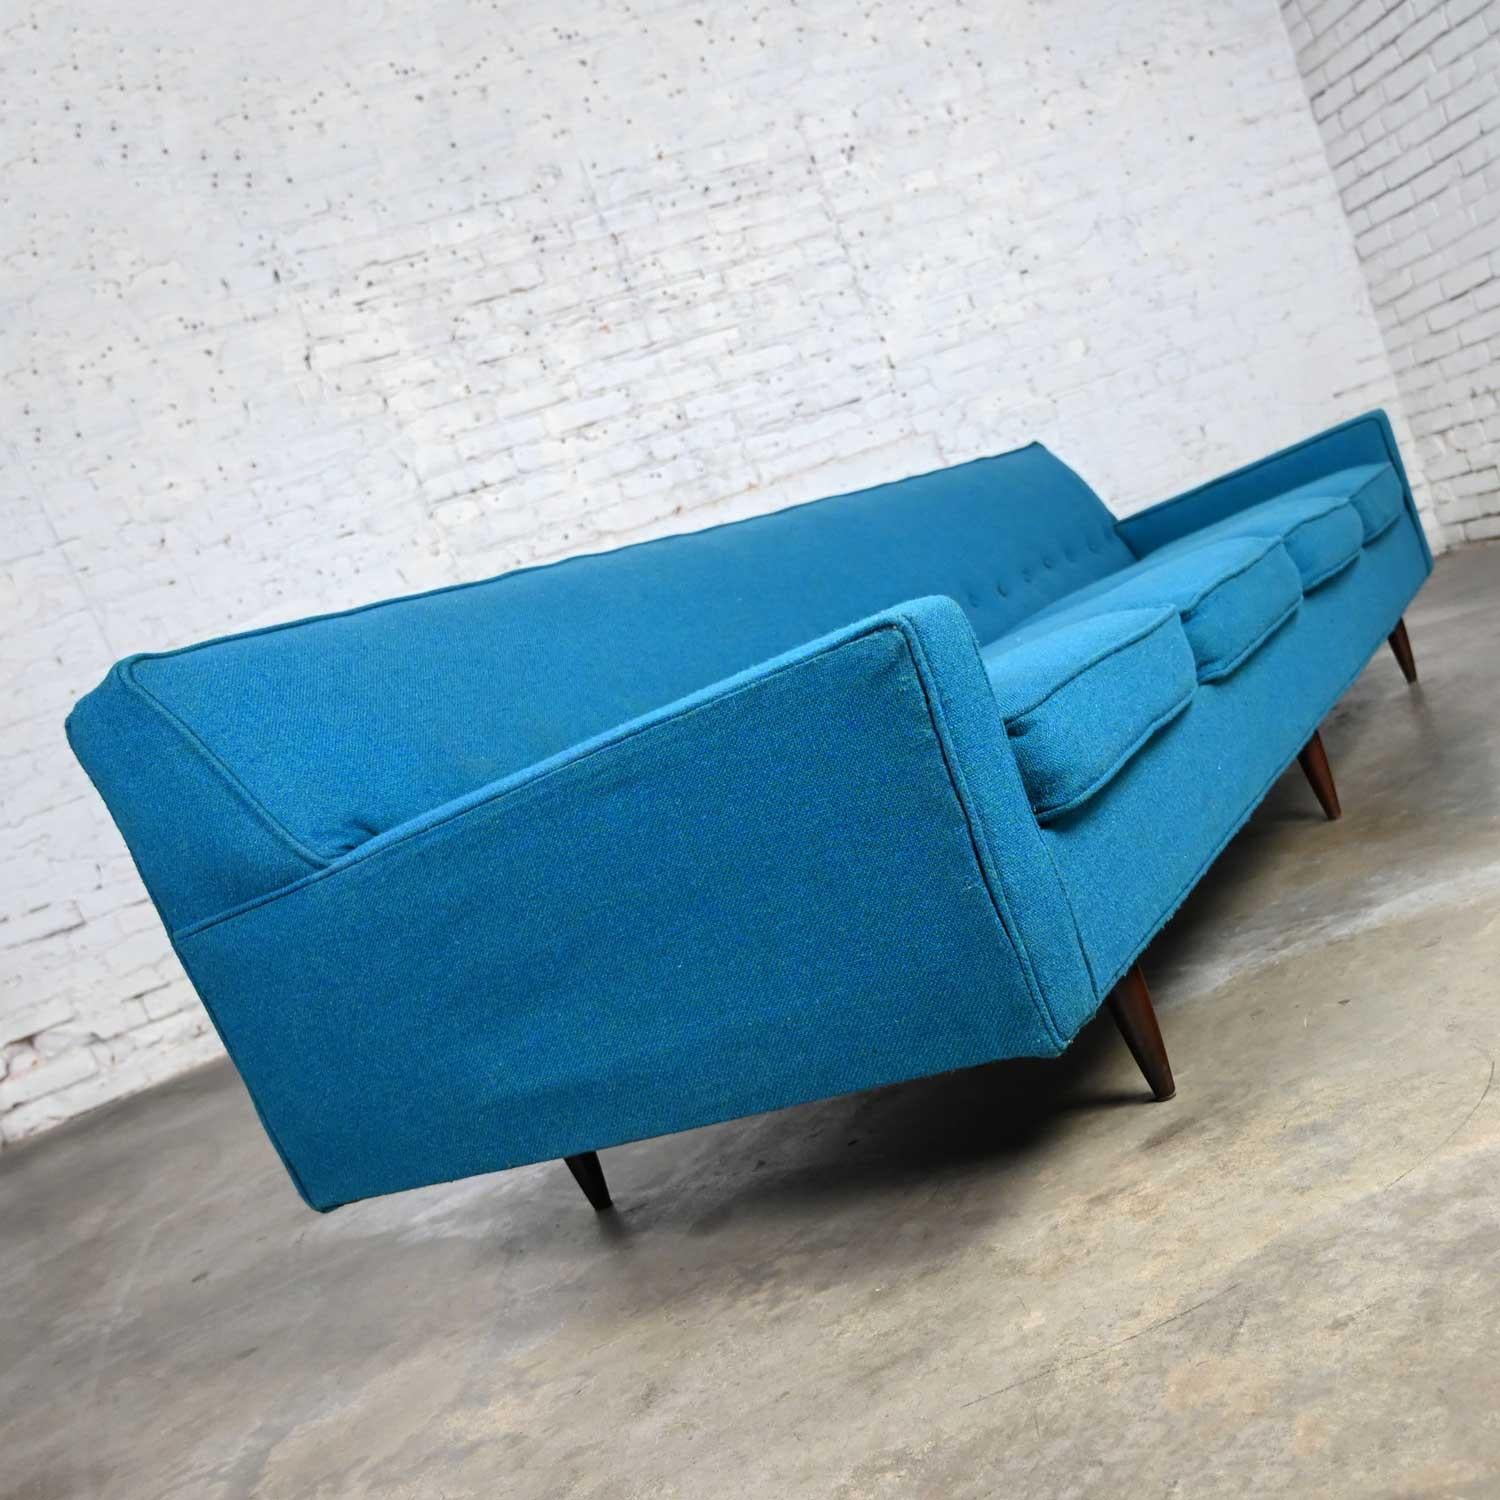 Mid-Century Modern Turquoise Lawson 4 Cushion Sofa Attr Milo Baughman James Inc. In Good Condition For Sale In Topeka, KS